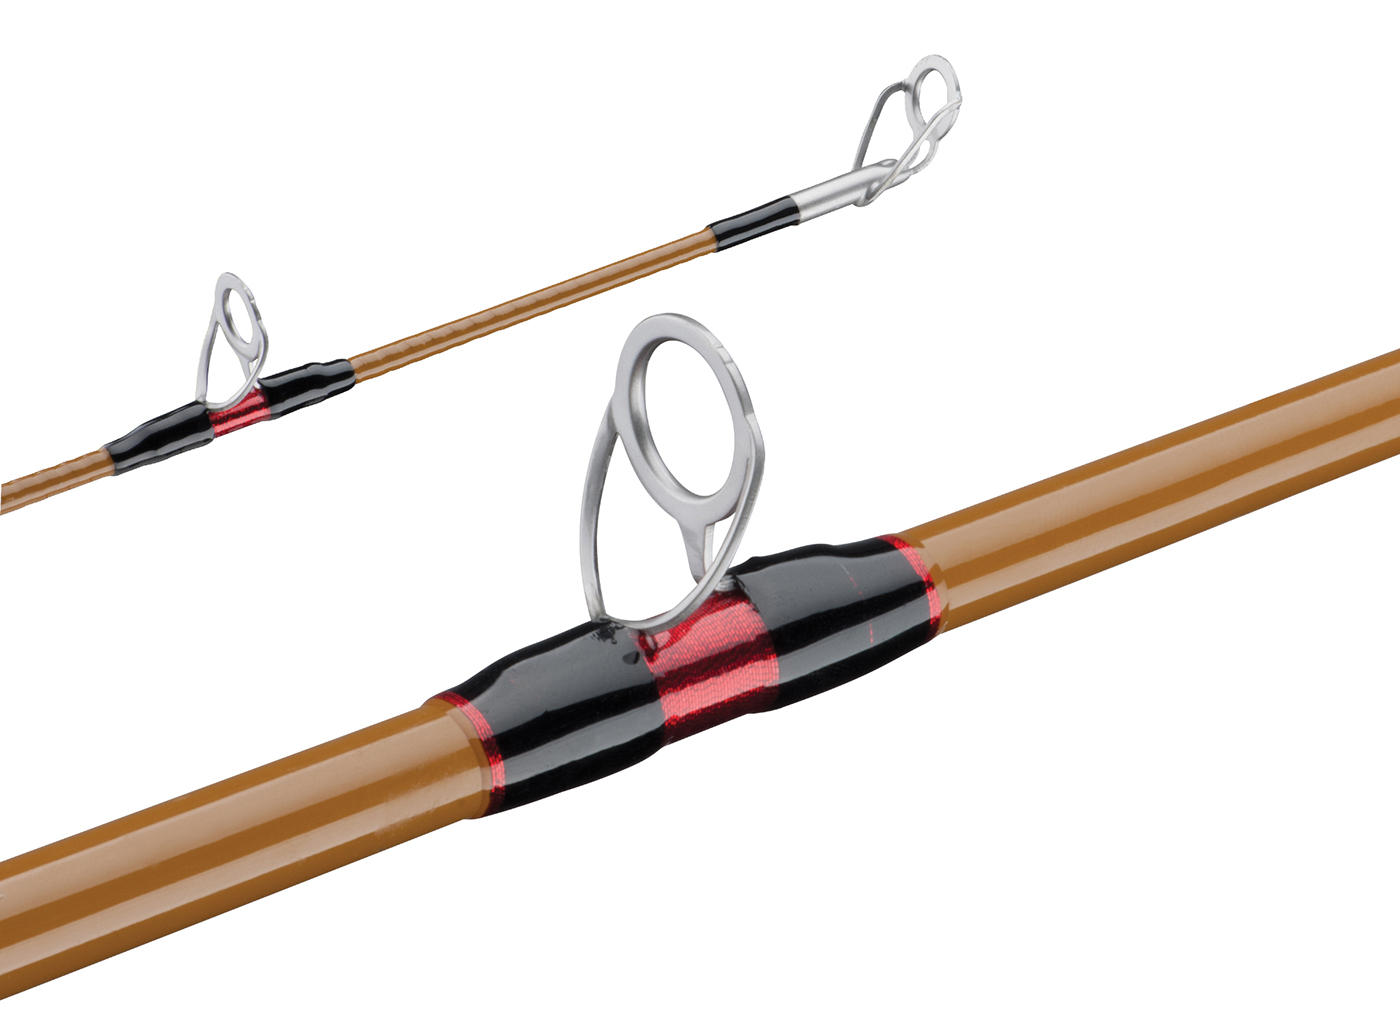 New 7ft Shakespeare tiger fishing pole jetty surf - sporting goods